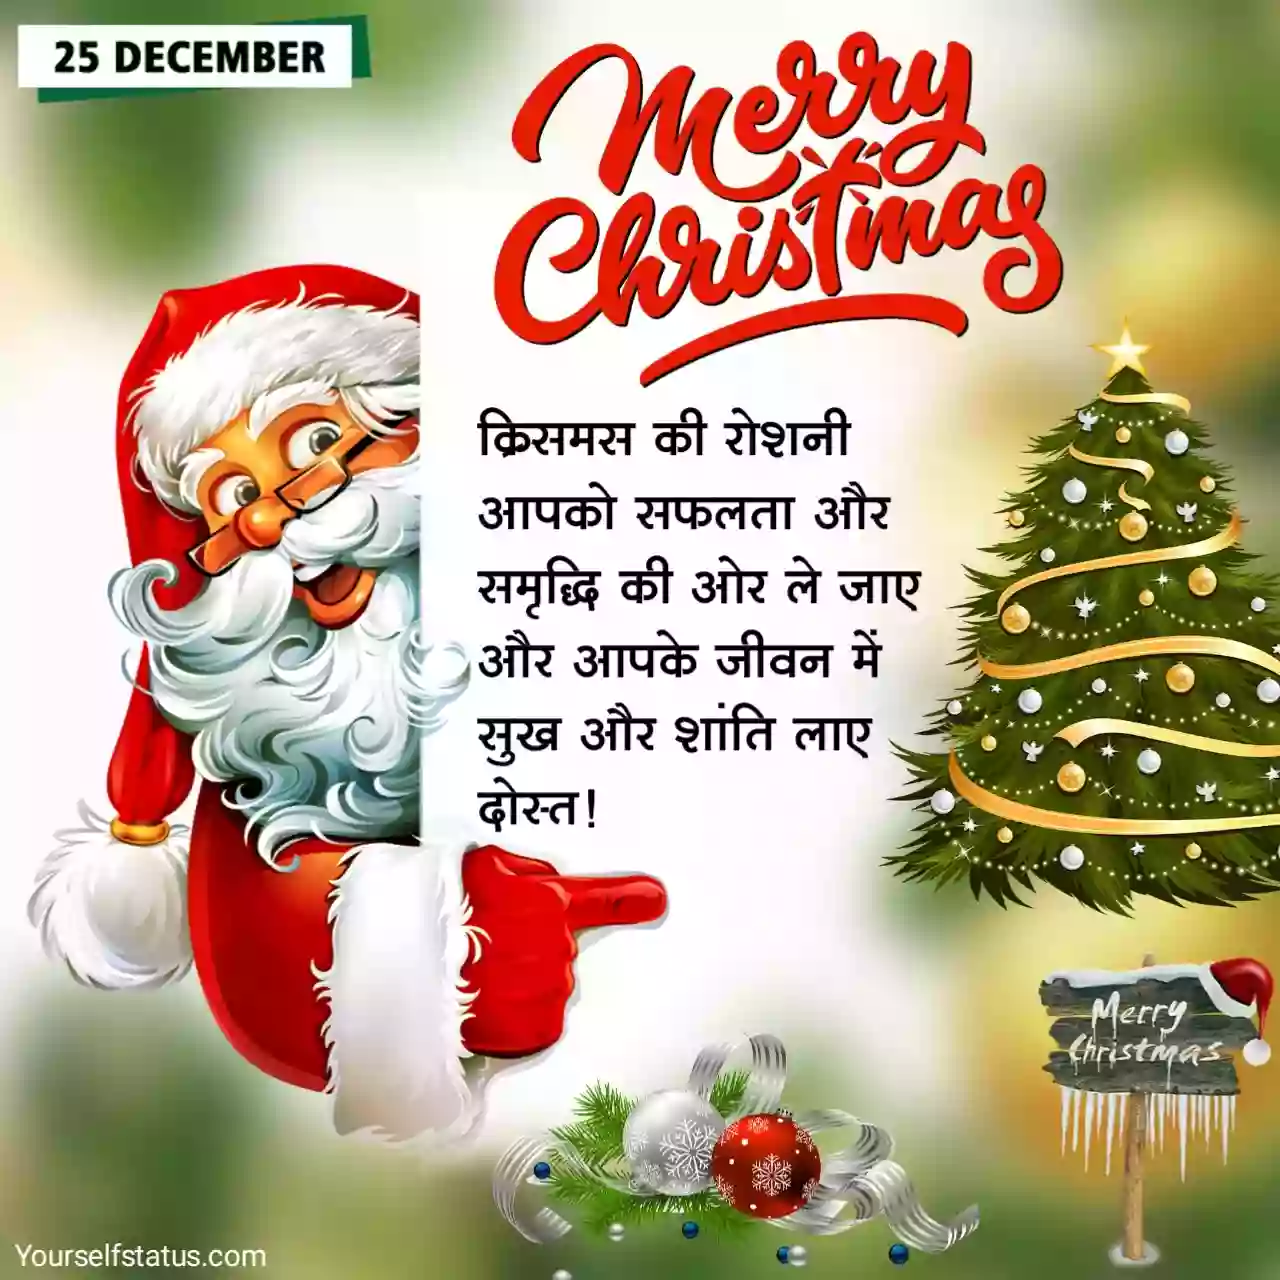 Christmas wishes for friends in hindi